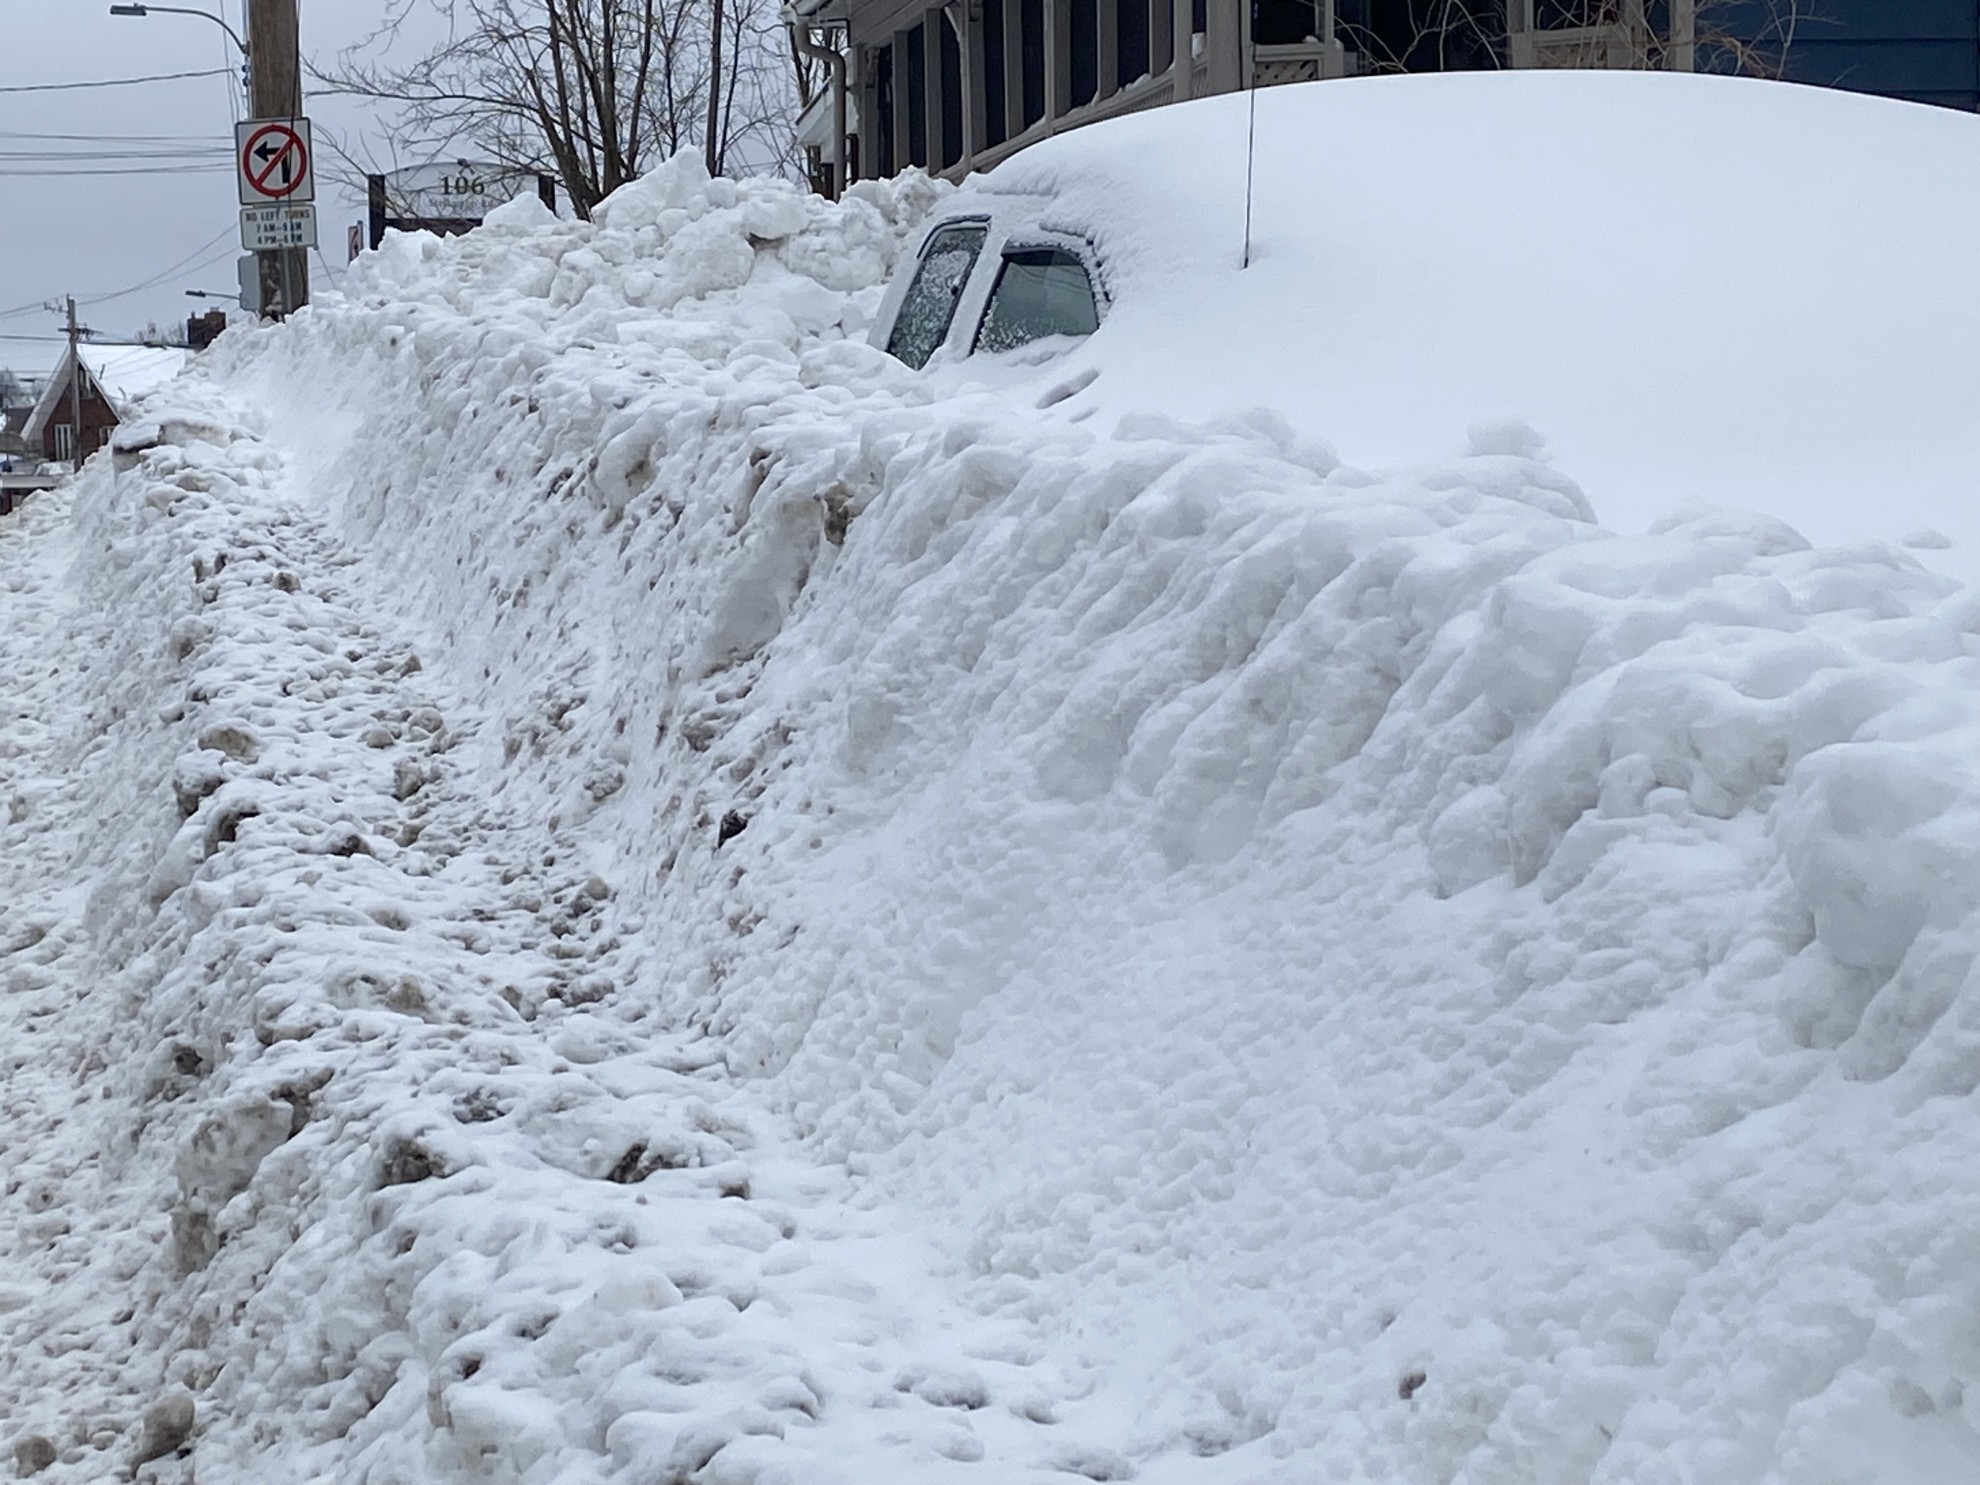 towering snow piles could lead to very expensive problems you didn't see coming